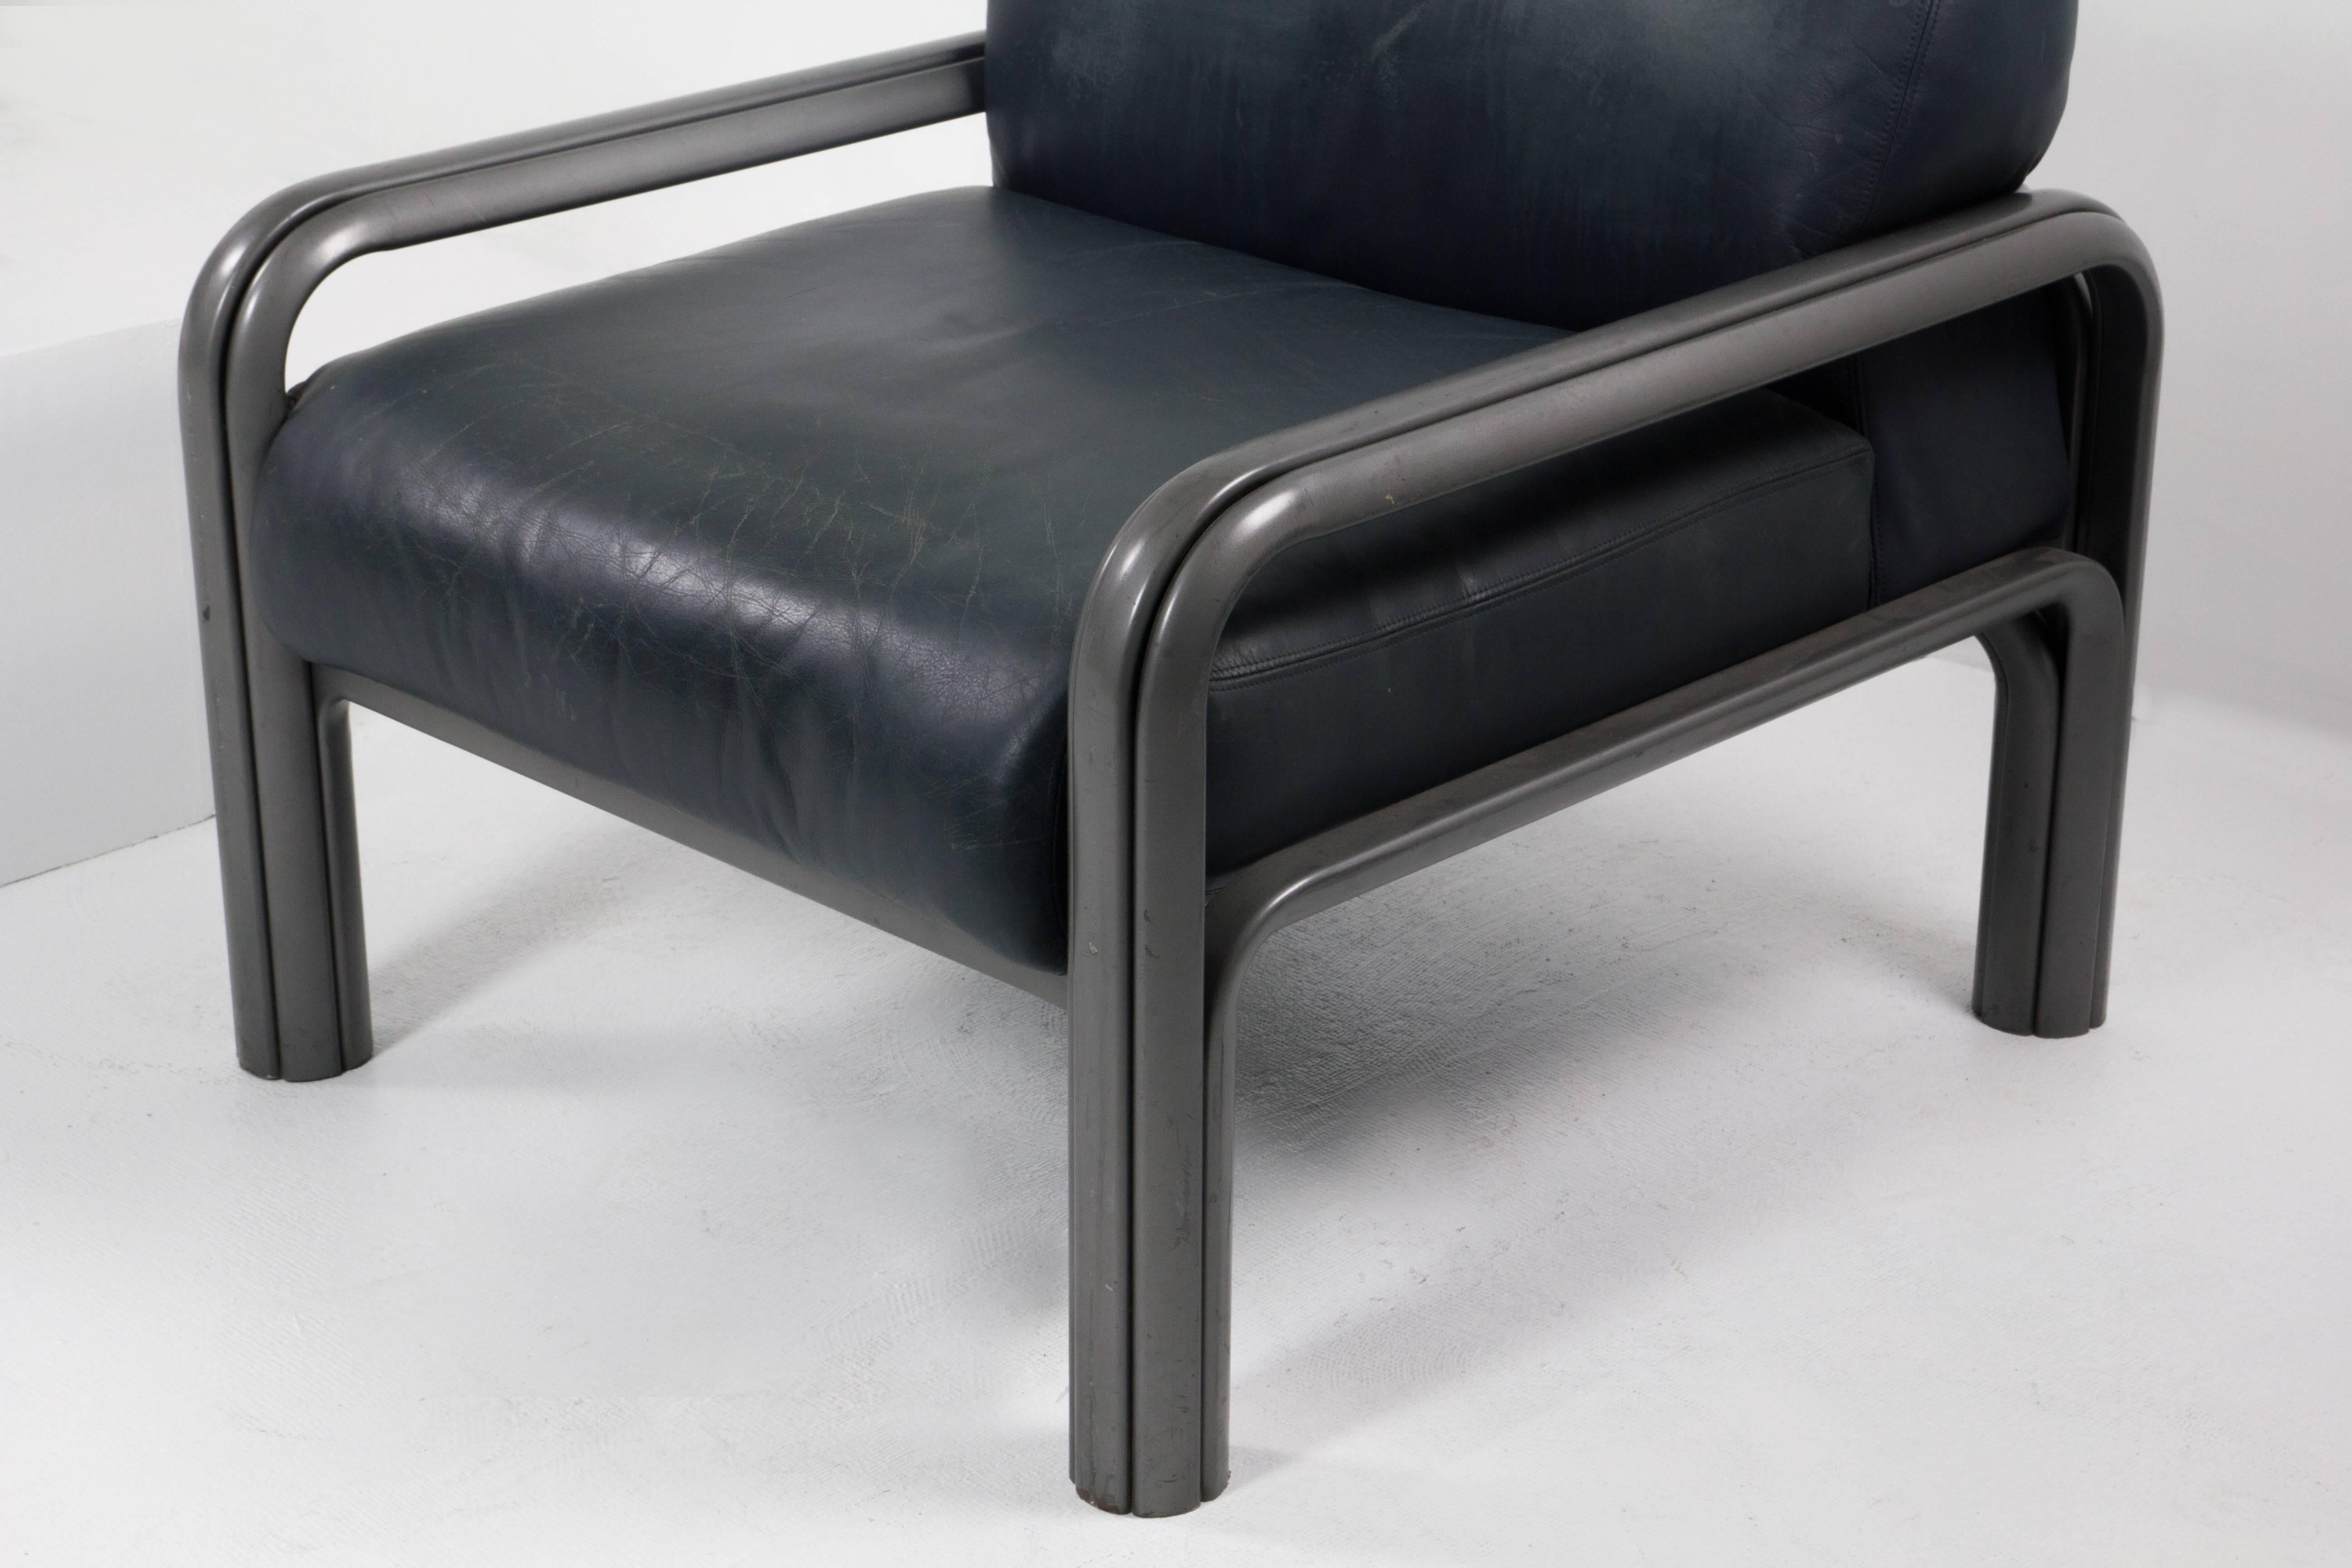 Pair of lounge chairs by Gae Aulenti for Knoll with extruded steel frames in grey enamel and loose cushions in leather.